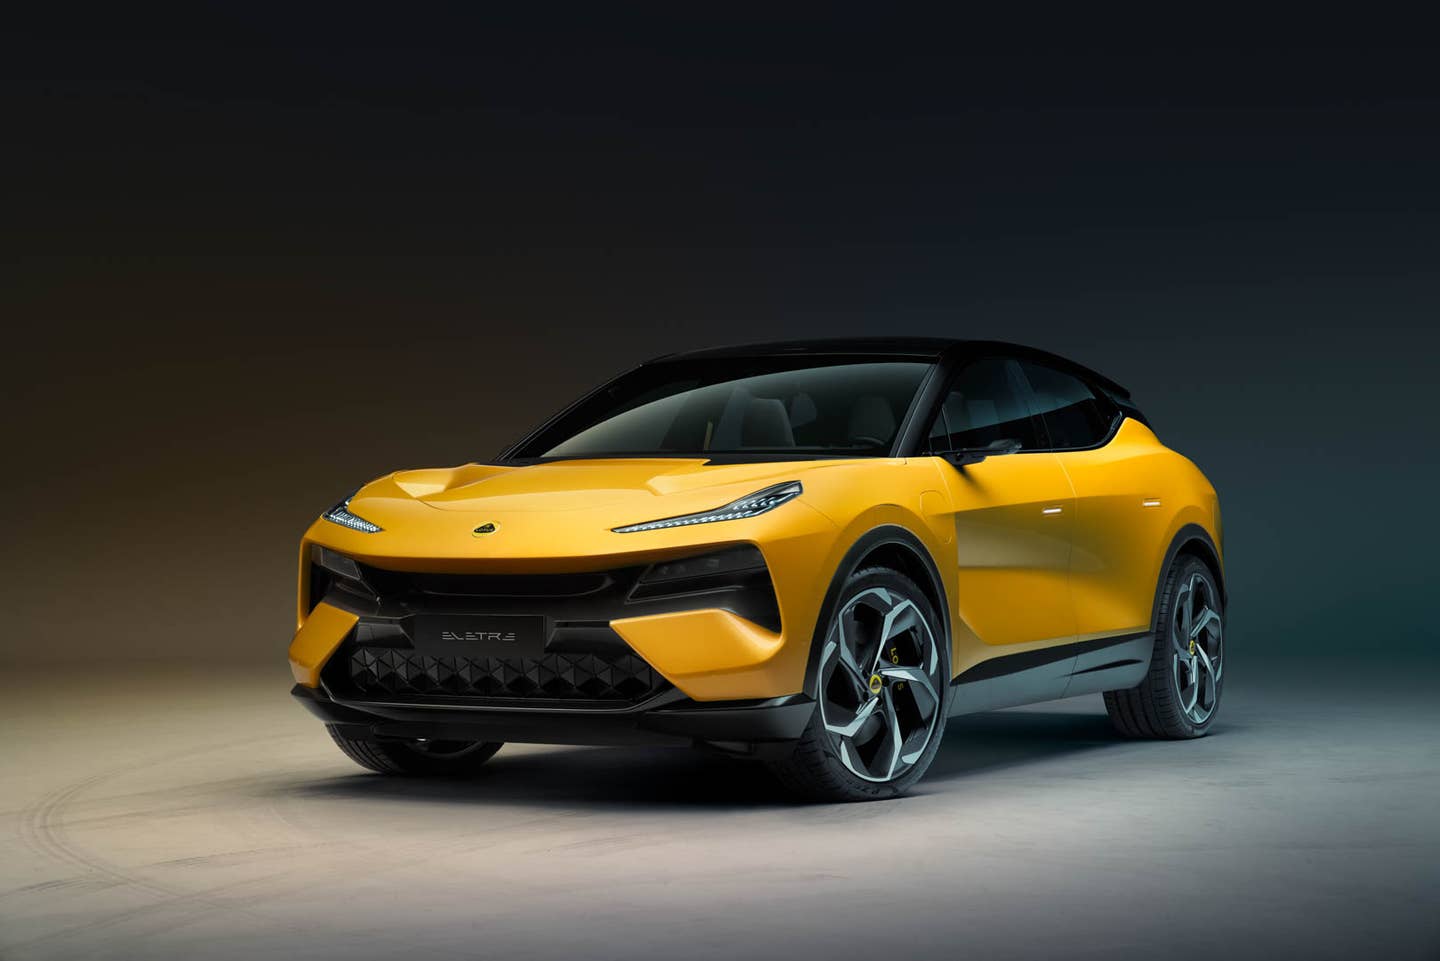 Electric Lotus Sport Sedan Coming in 2023 to Take on the Porsche Taycan